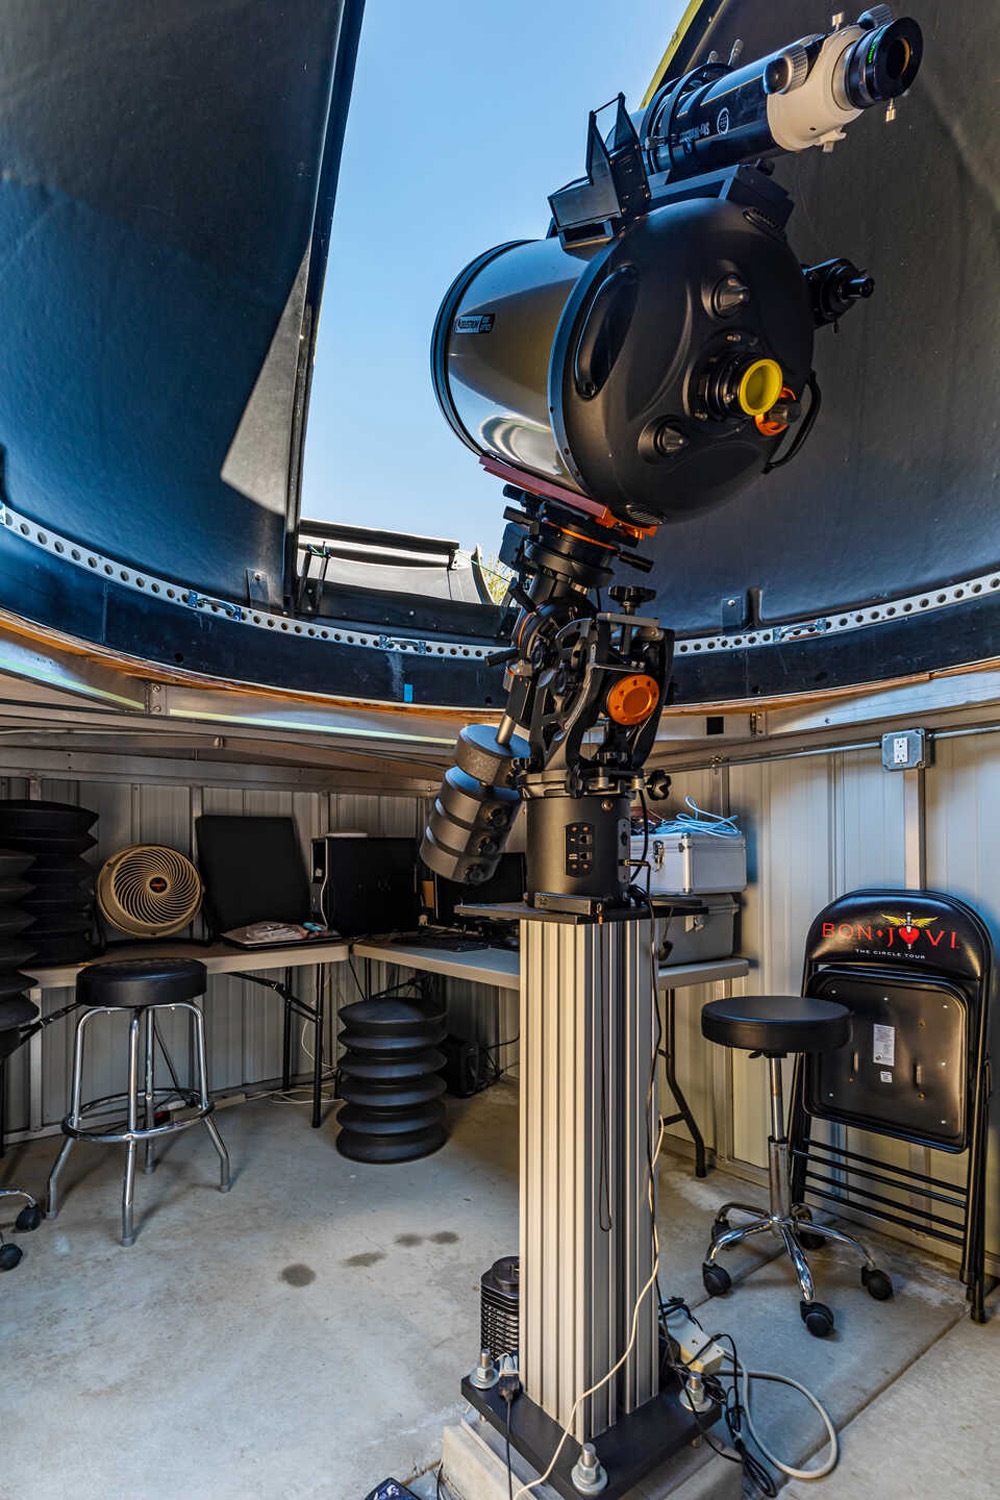 On the hill on the back of the property there is a stargazing observatory with a powerful rotating telescope